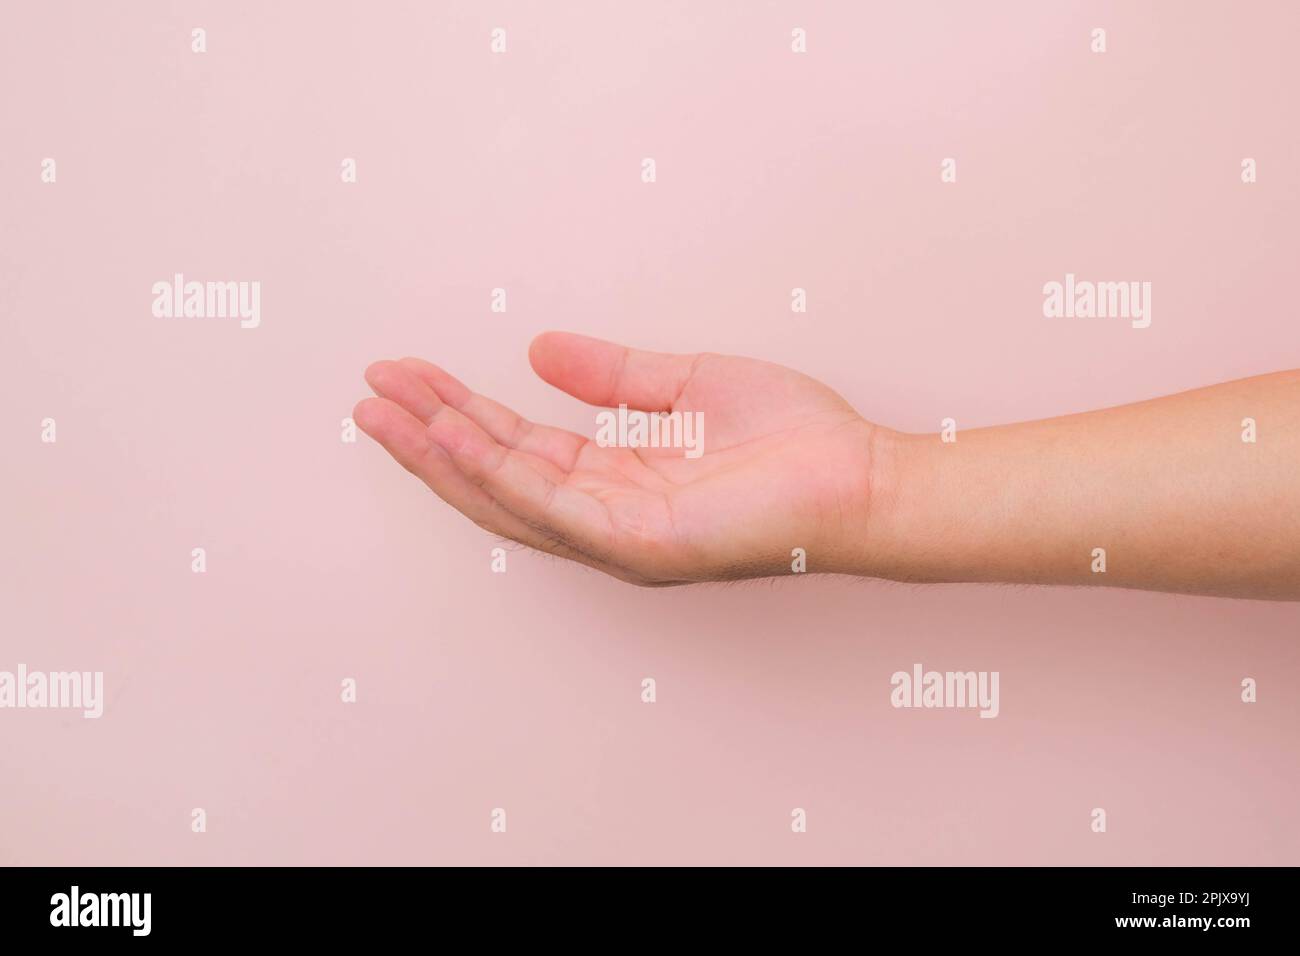 Close up male hand reaching out ready to help or receive isolated on pink background. Helping hand outstretched for salvation. Stock Photo